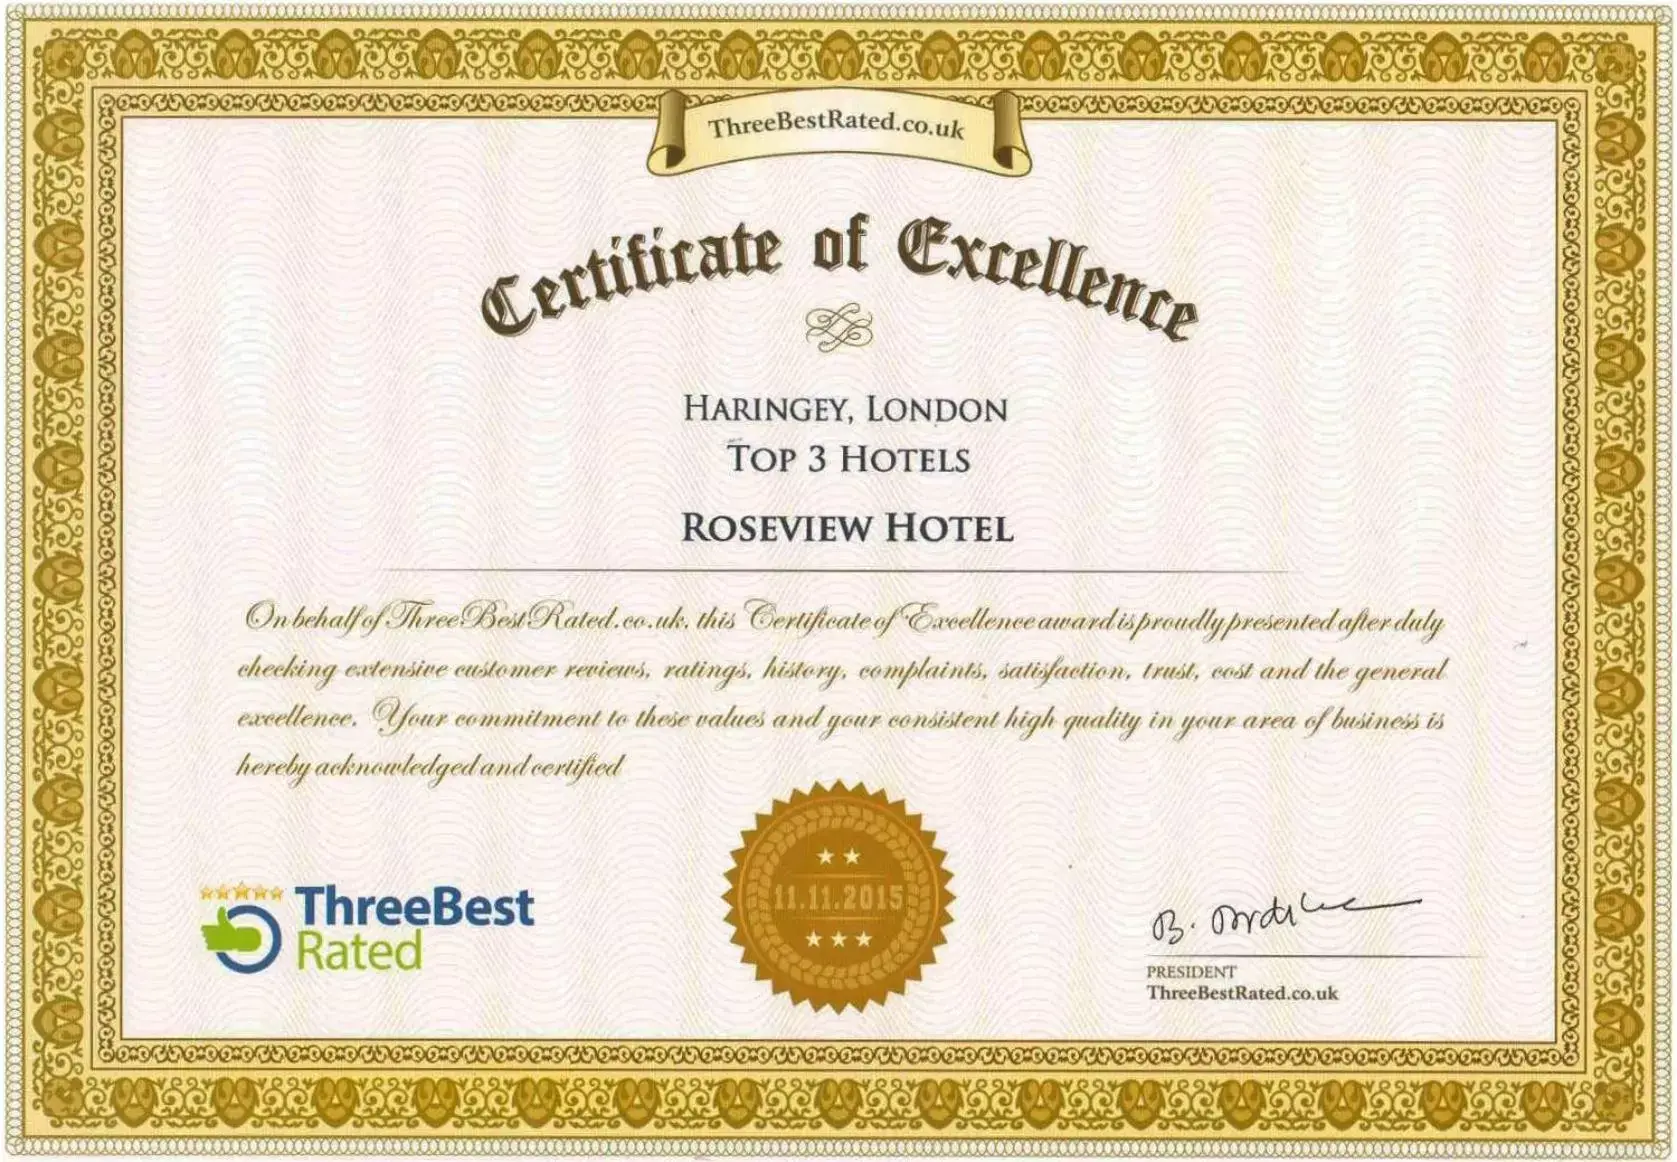 Certificate/Award in Roseview Alexandra Palace Hotel